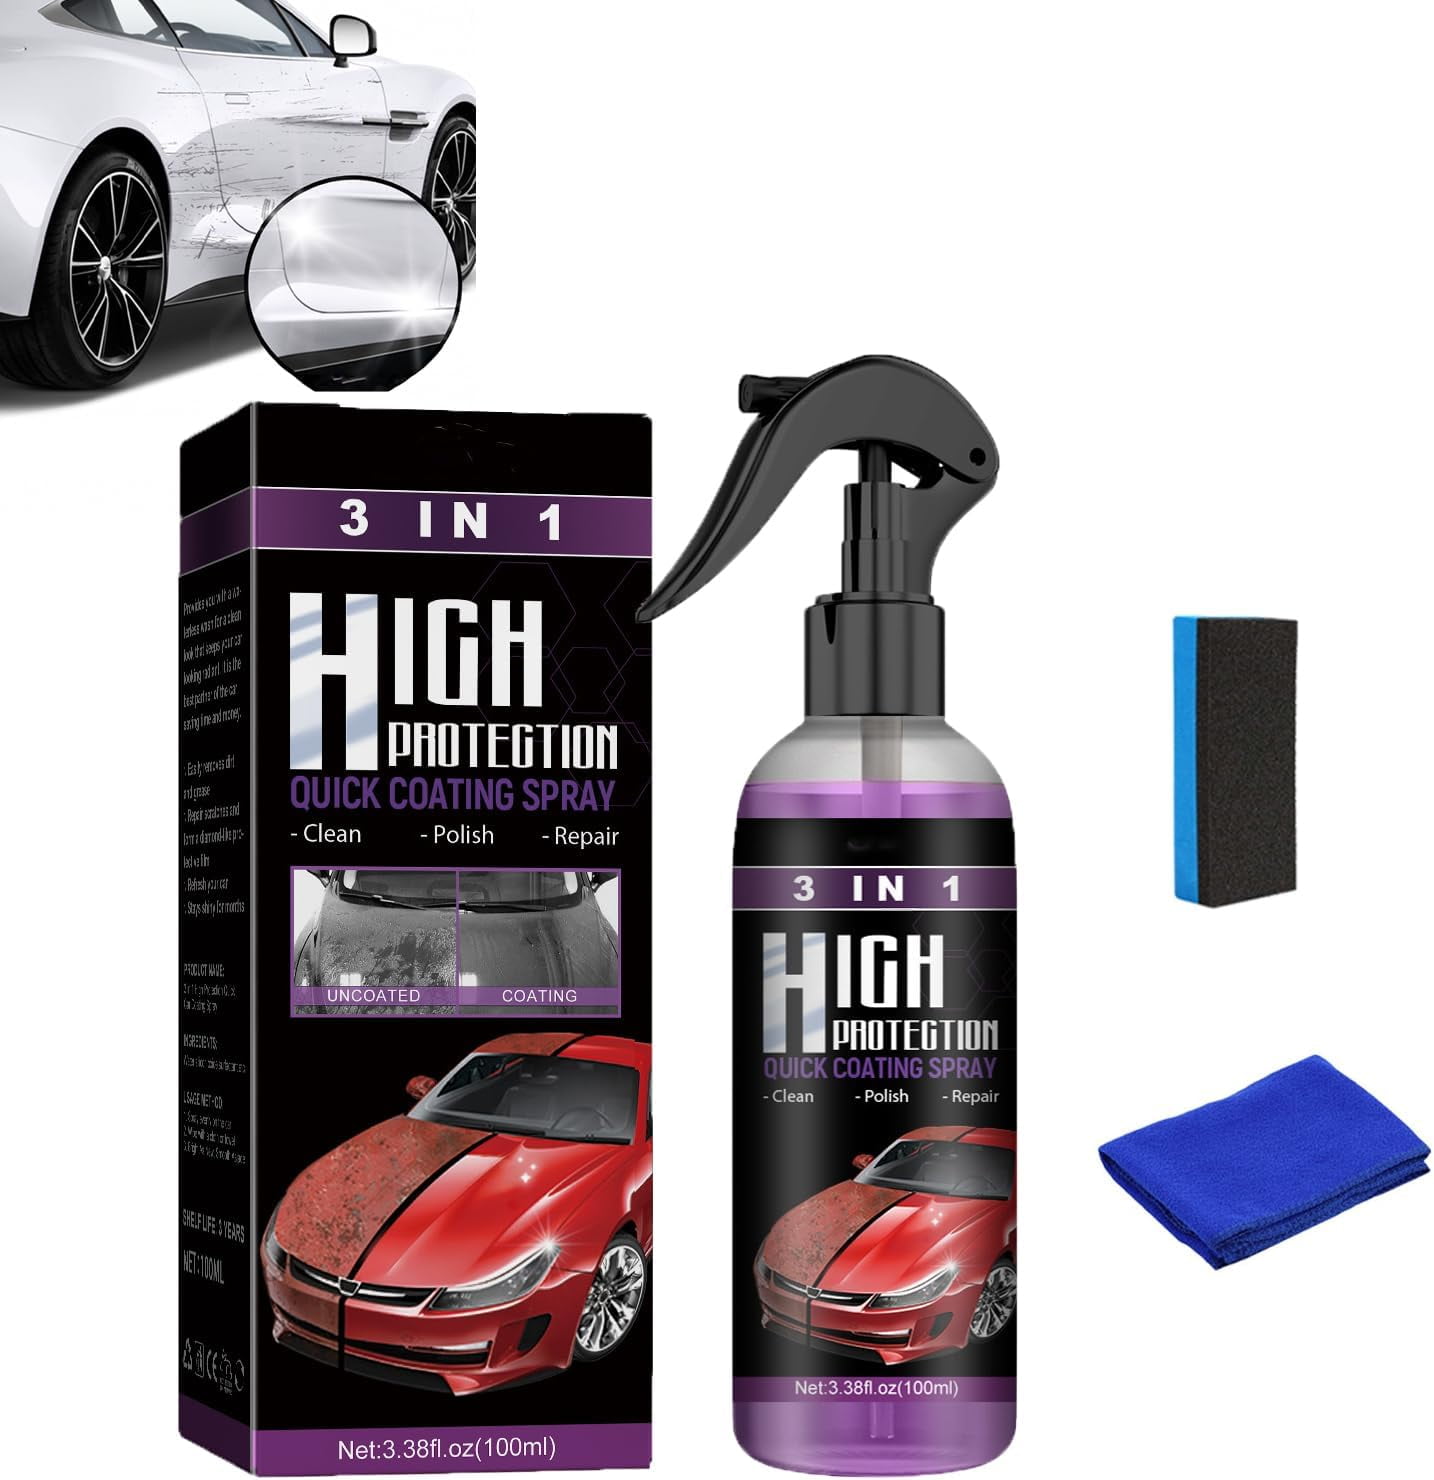 3 In 1 High Protection Quick Car Coating Spray, 5 Bottles Ottostuart Car  Coating Agent, 3-In-1 High Protection Car Spray 3 In 1 Spray Quick Coating